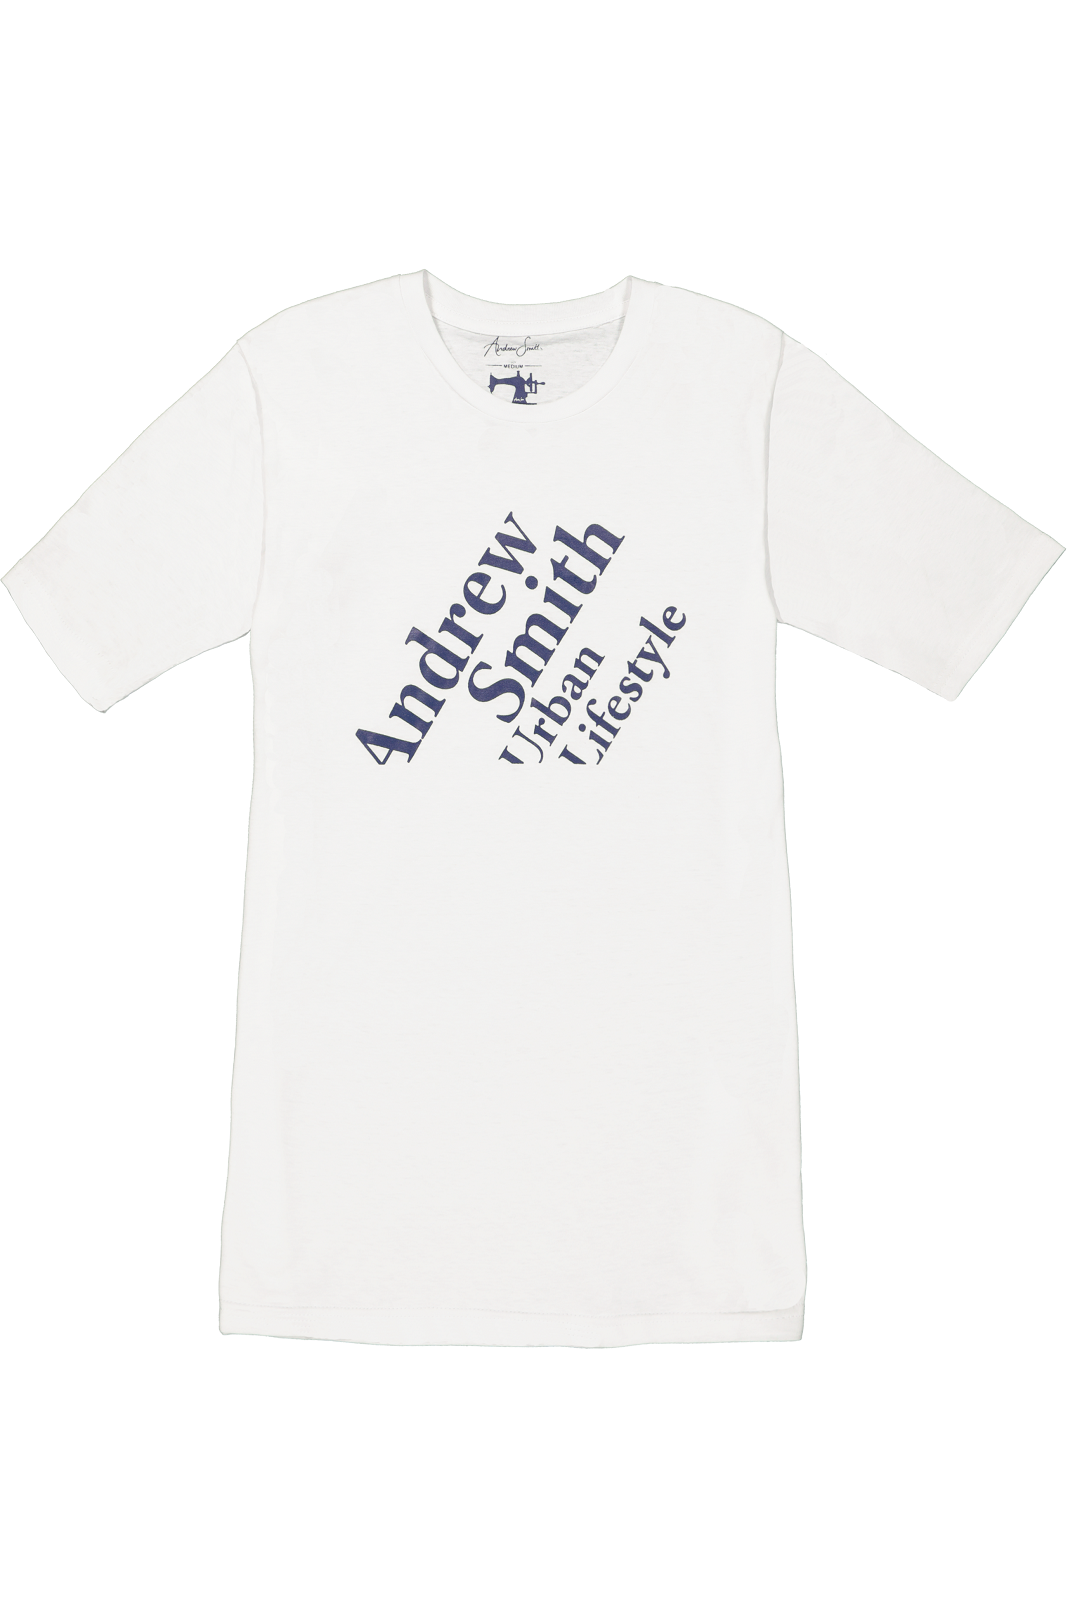 Andrew Smith T-Shirt Slim Fit Pria A0114X08A